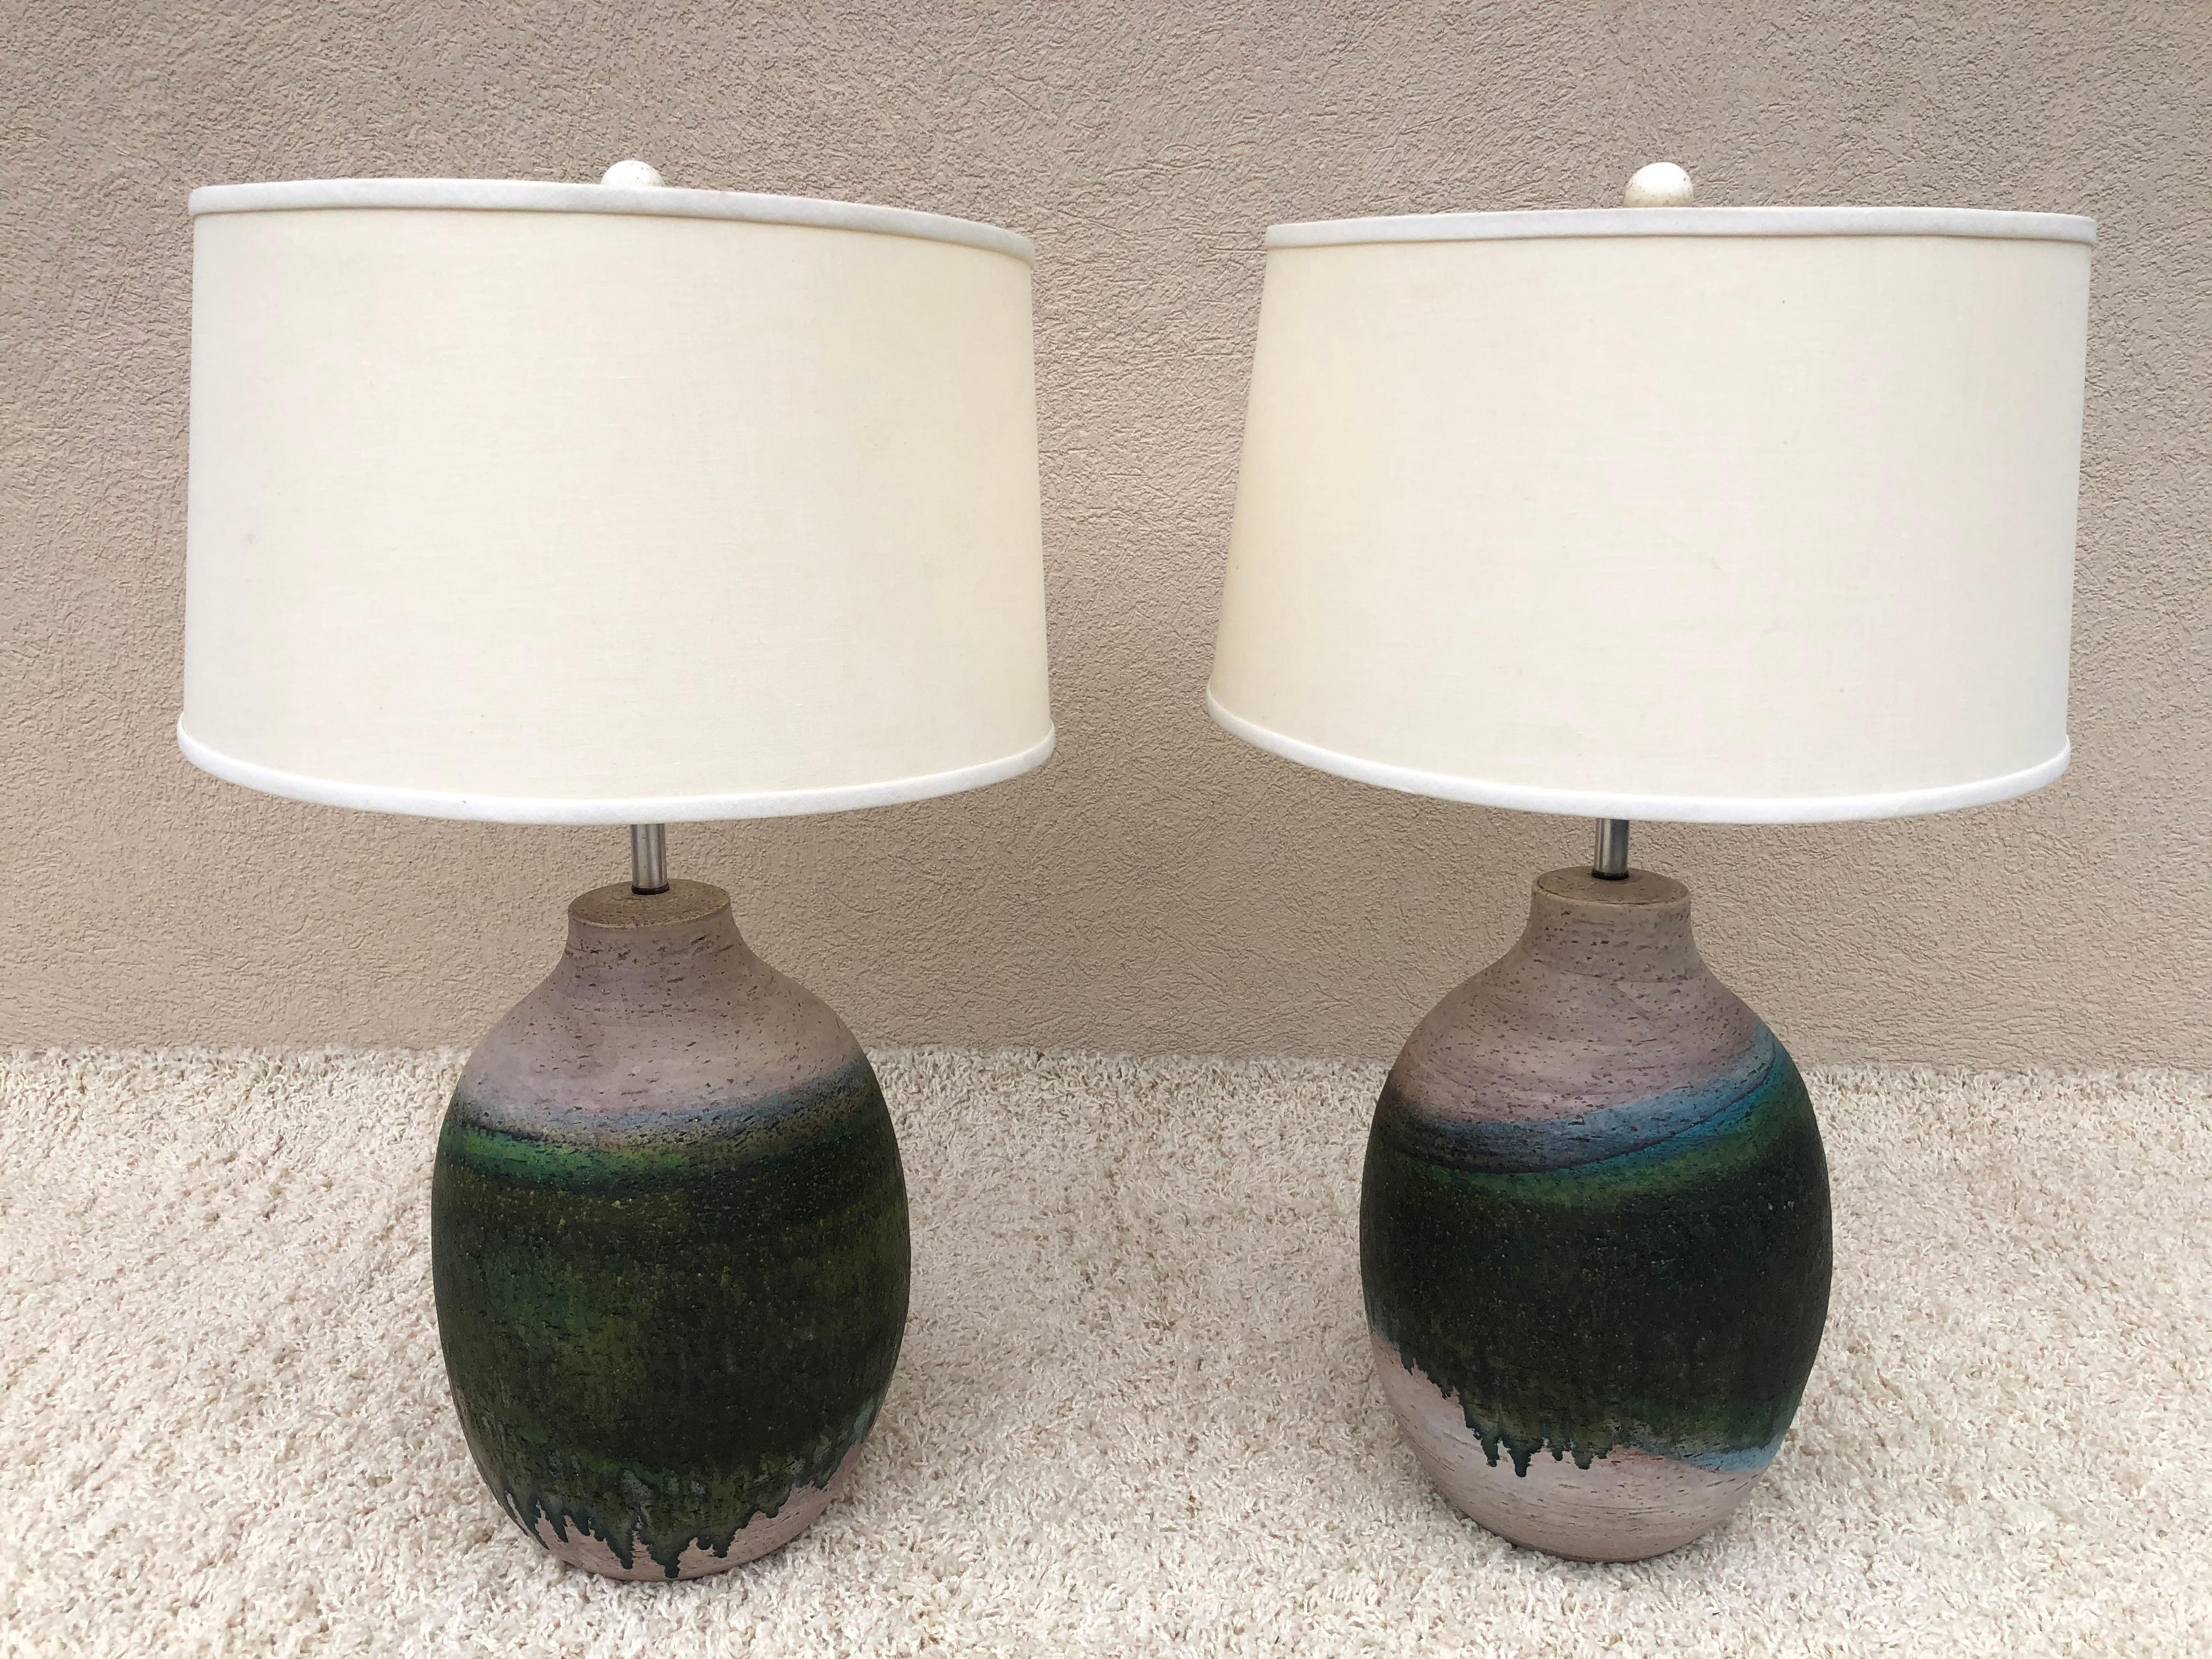 Pair of extra large Marcelo Fantoni signed ceramic hand glazed lamps, turquoise and green brown and crème background, top quality made with original harps which are adjustable mechanism to make very tall, heavy ceramic ball finial, rewired and felt